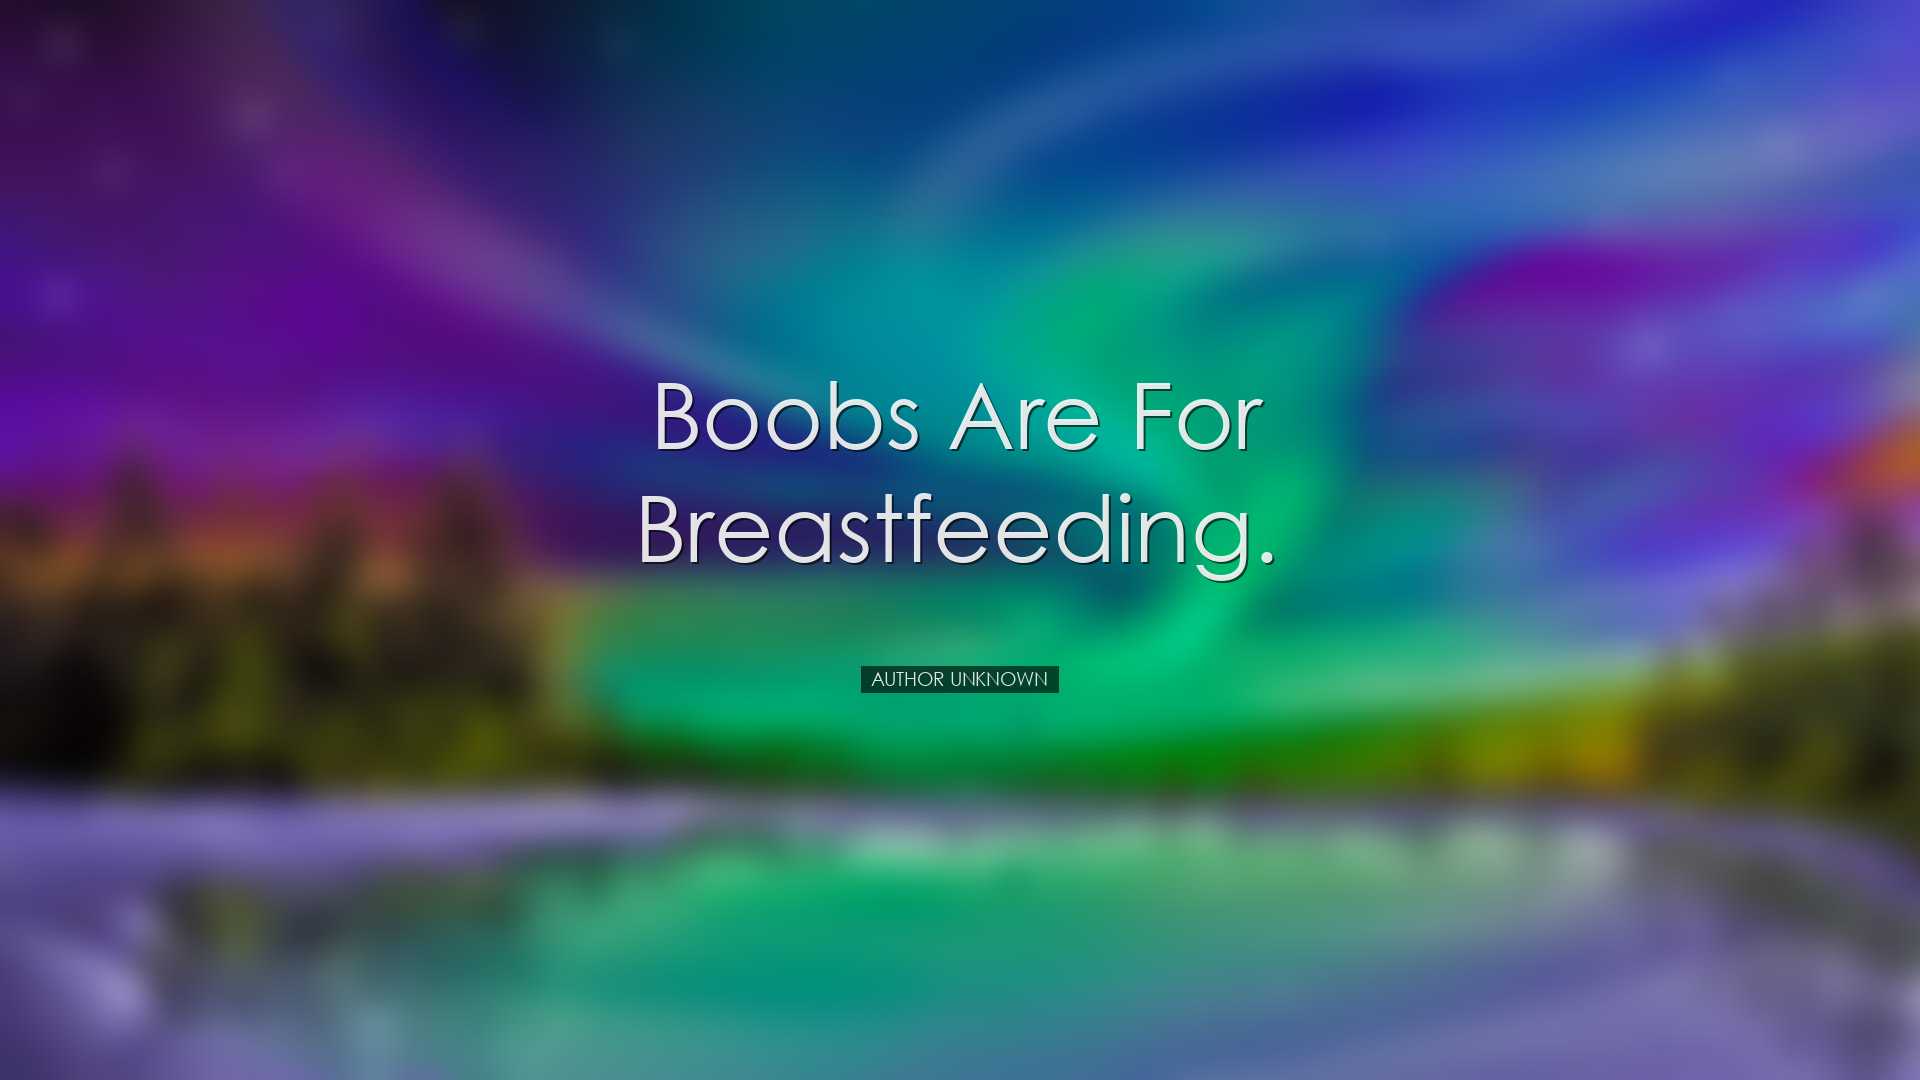 Boobs are for breastfeeding. - Author Unknown